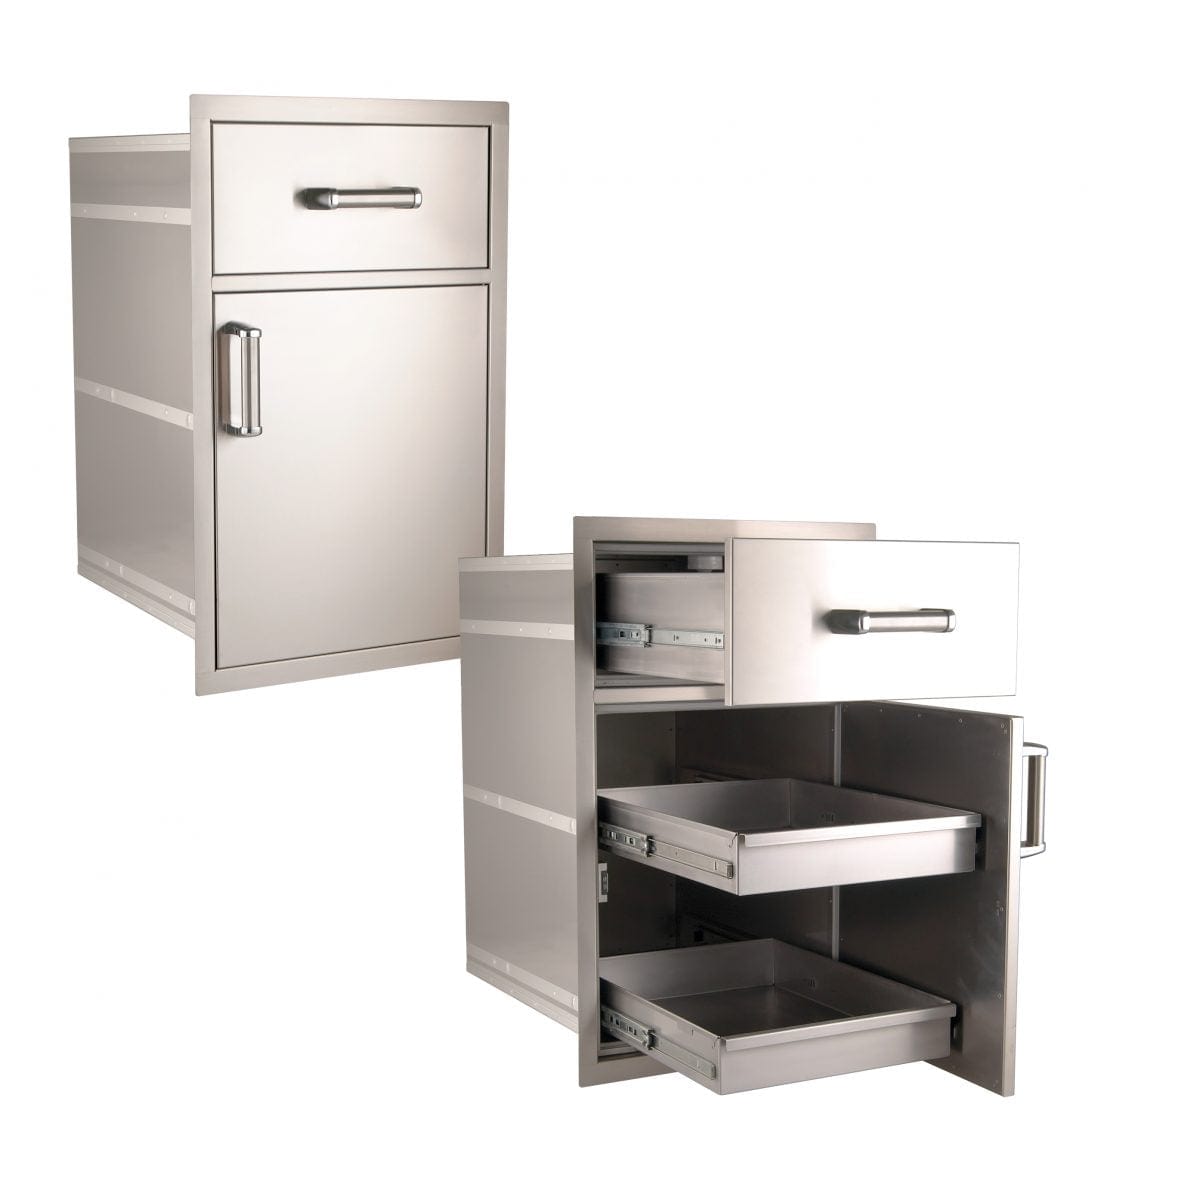 Fire Magic Large Pantry Door/Drawer Combo - Kitchen King Direct